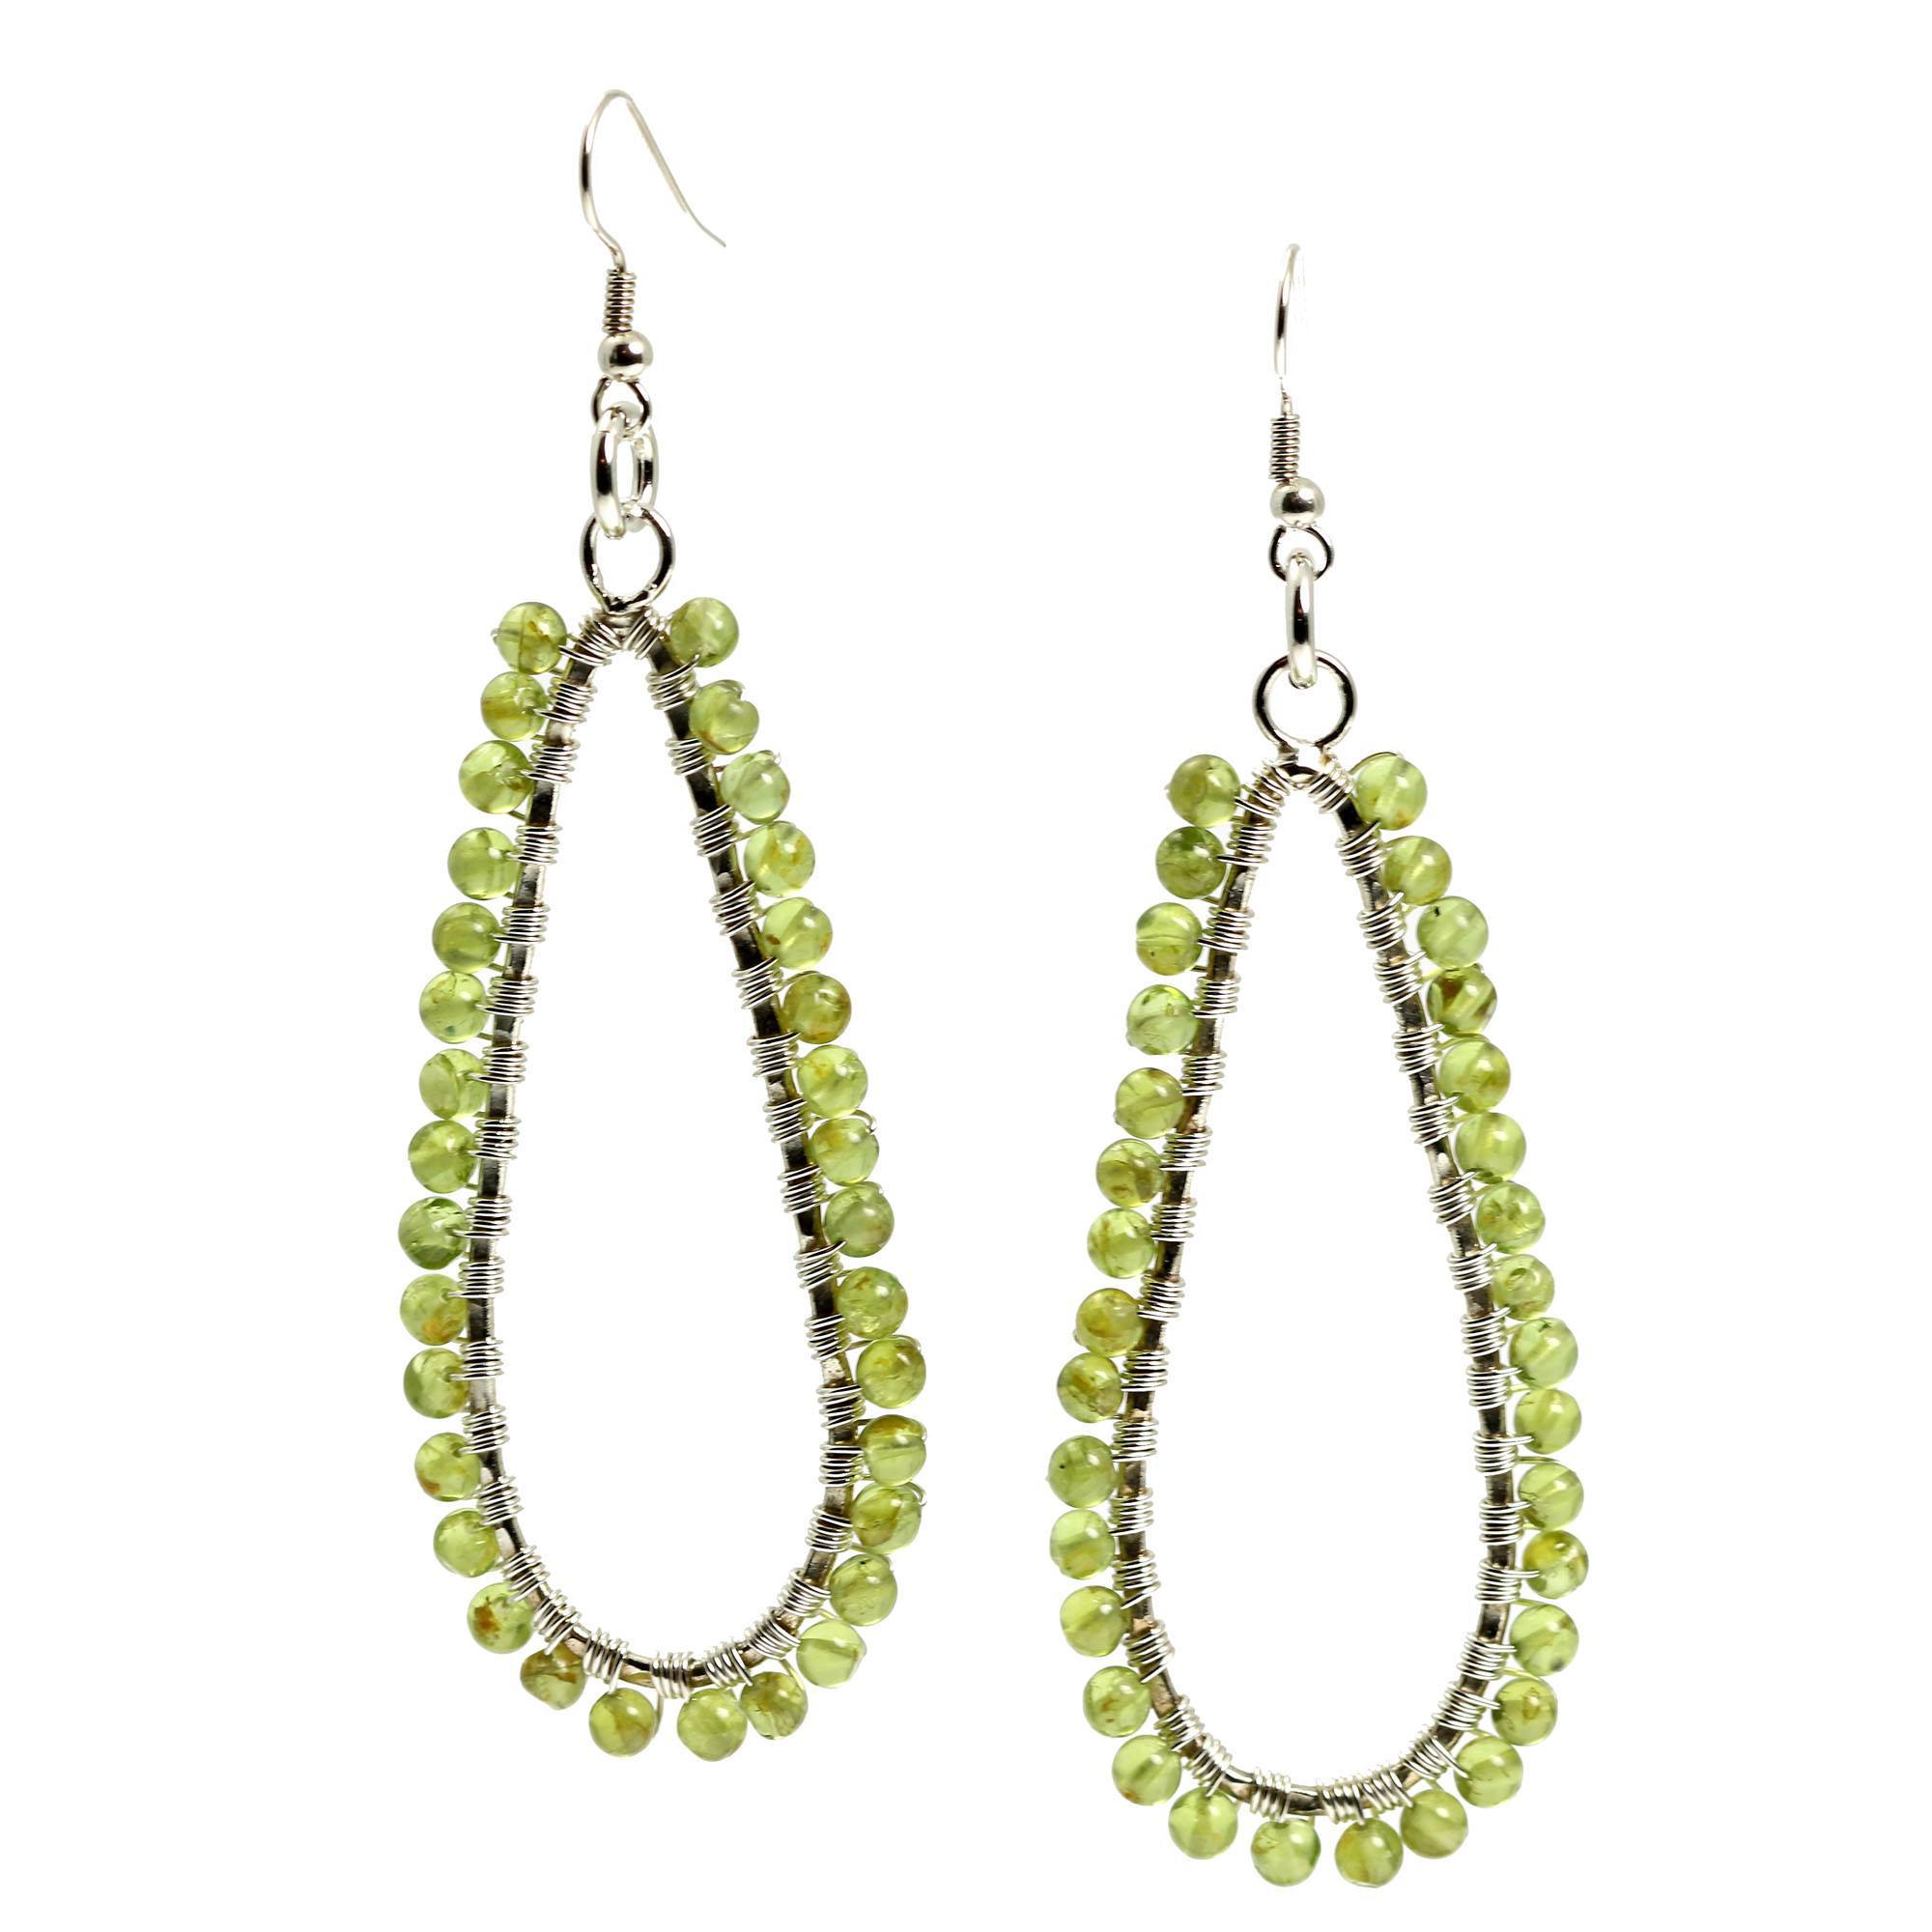 Detail View Hammered Silver Teardrop Earrings with Peridot3